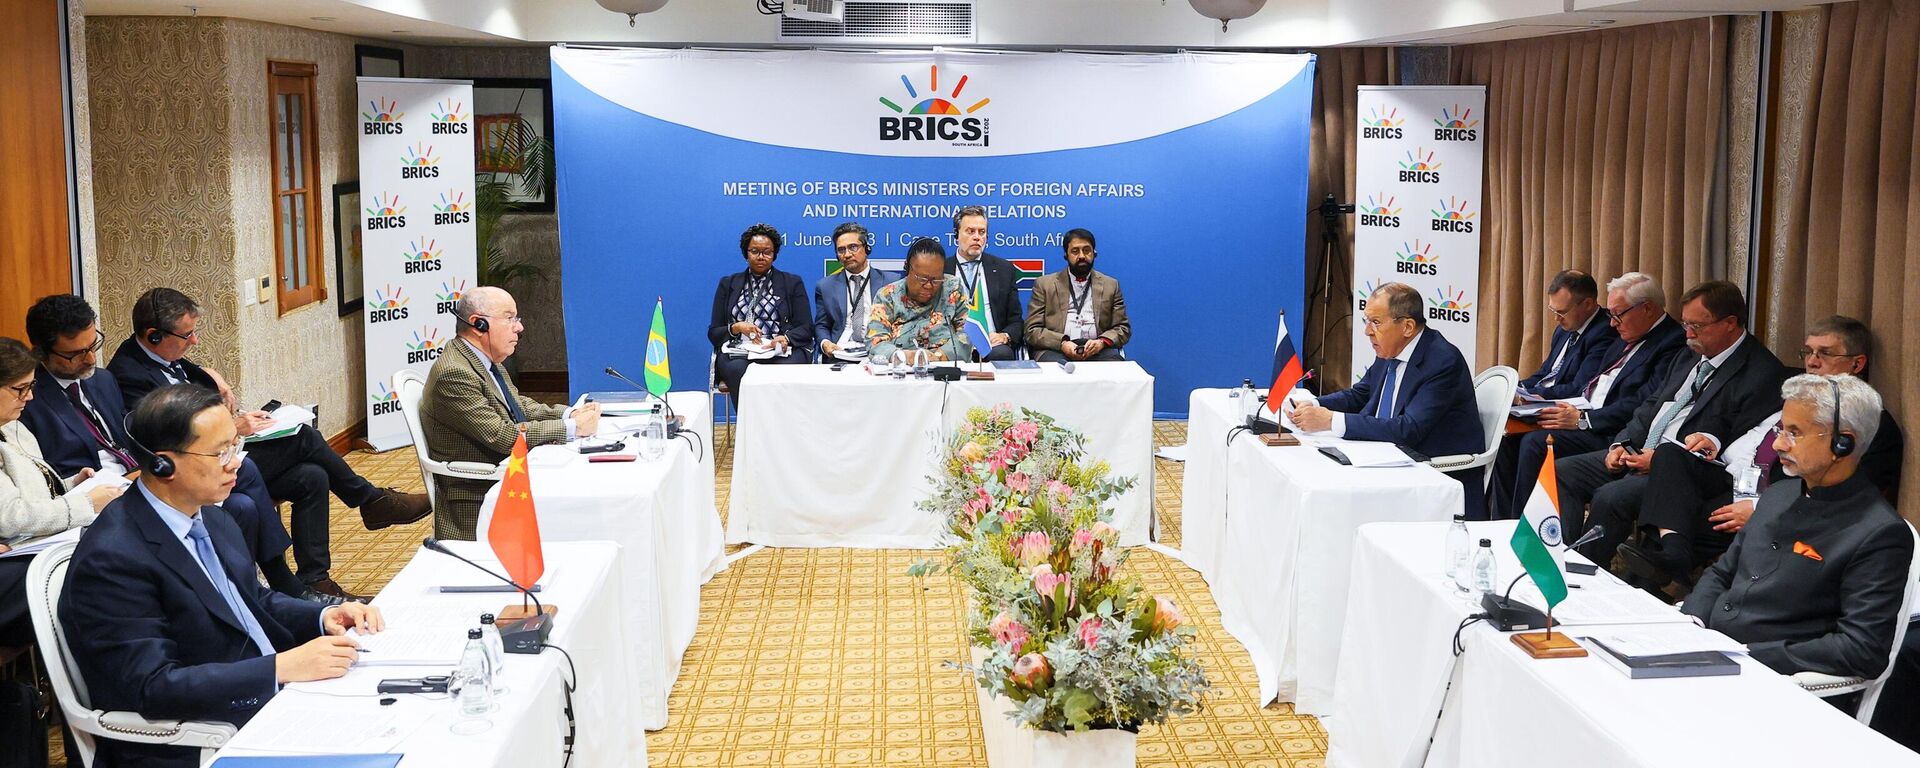 The plenary of the BRICS ministerial meeting, held on June 1 in Cape Town, South Africa.   - Sputnik Africa, 1920, 01.06.2023